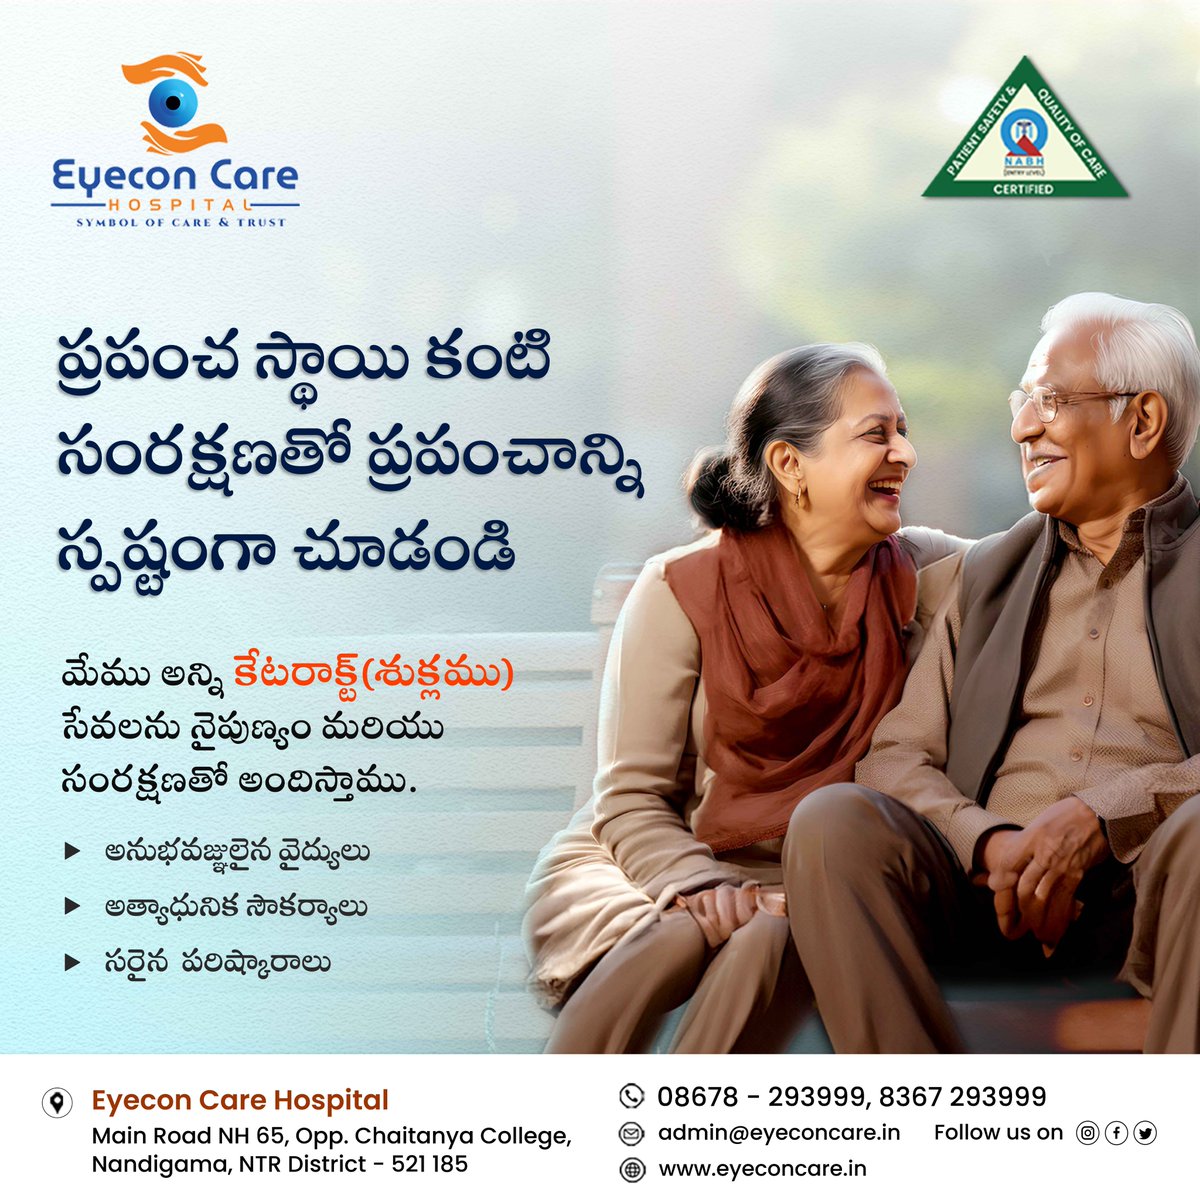 Clear vision, expert care! 👁️✨ Eyeconcare is your trusted partner in cataract treatment, delivering top-notch services with a focus on your eye health.

#eyeconcarehospital #eyeconcare #Nandigama #cataract #ophthalmology #cataractsurgery #eyecare #eyesurgery #eyedoctor